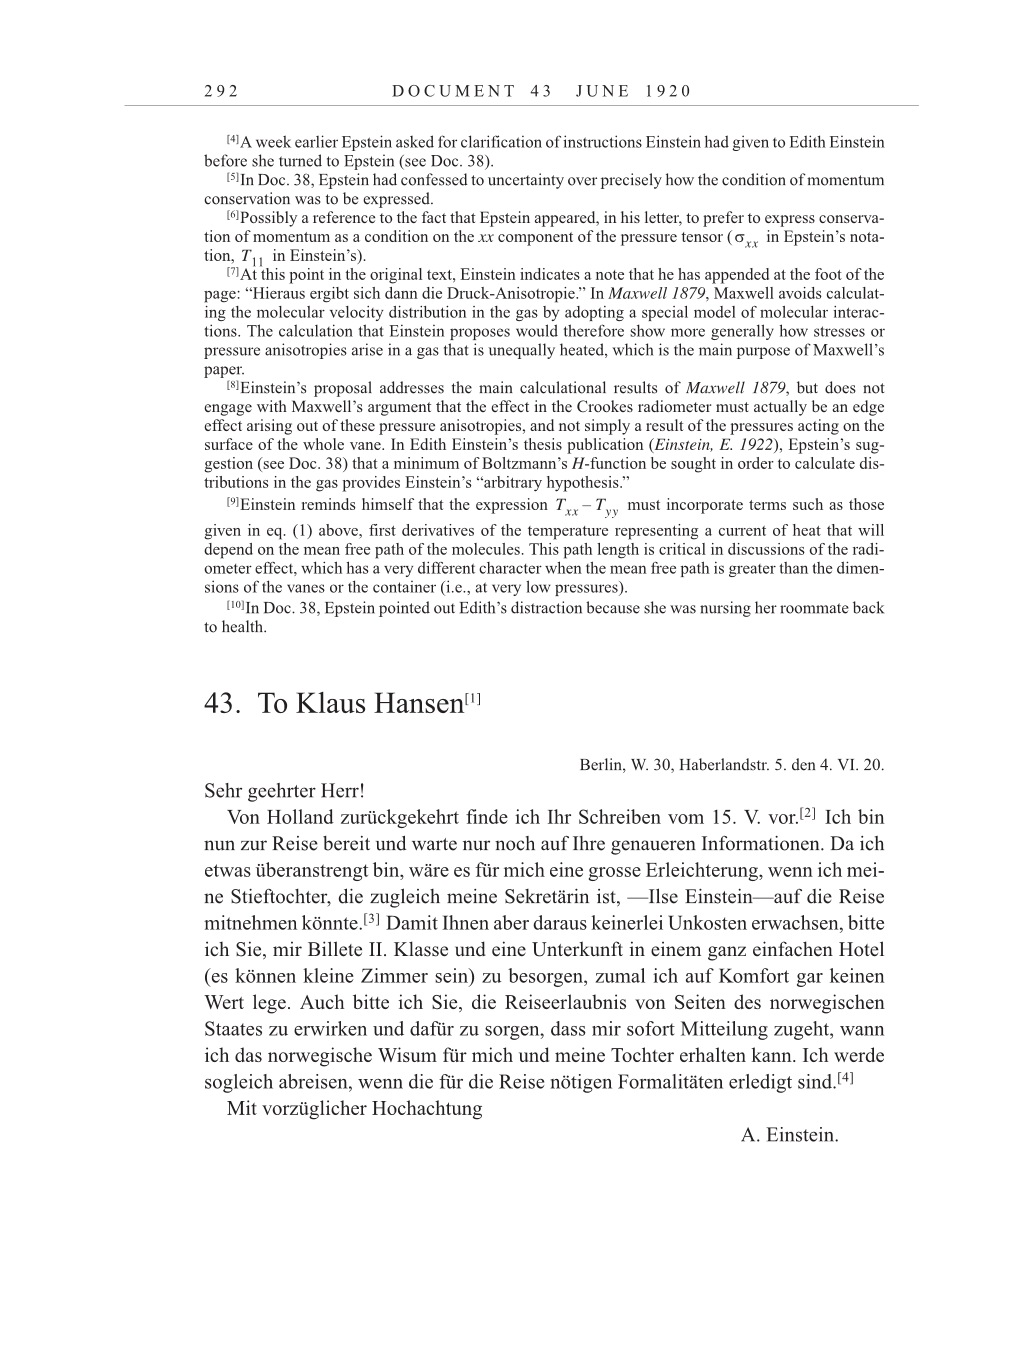 Volume 10: The Berlin Years: Correspondence May-December 1920 / Supplementary Correspondence 1909-1920 page 292